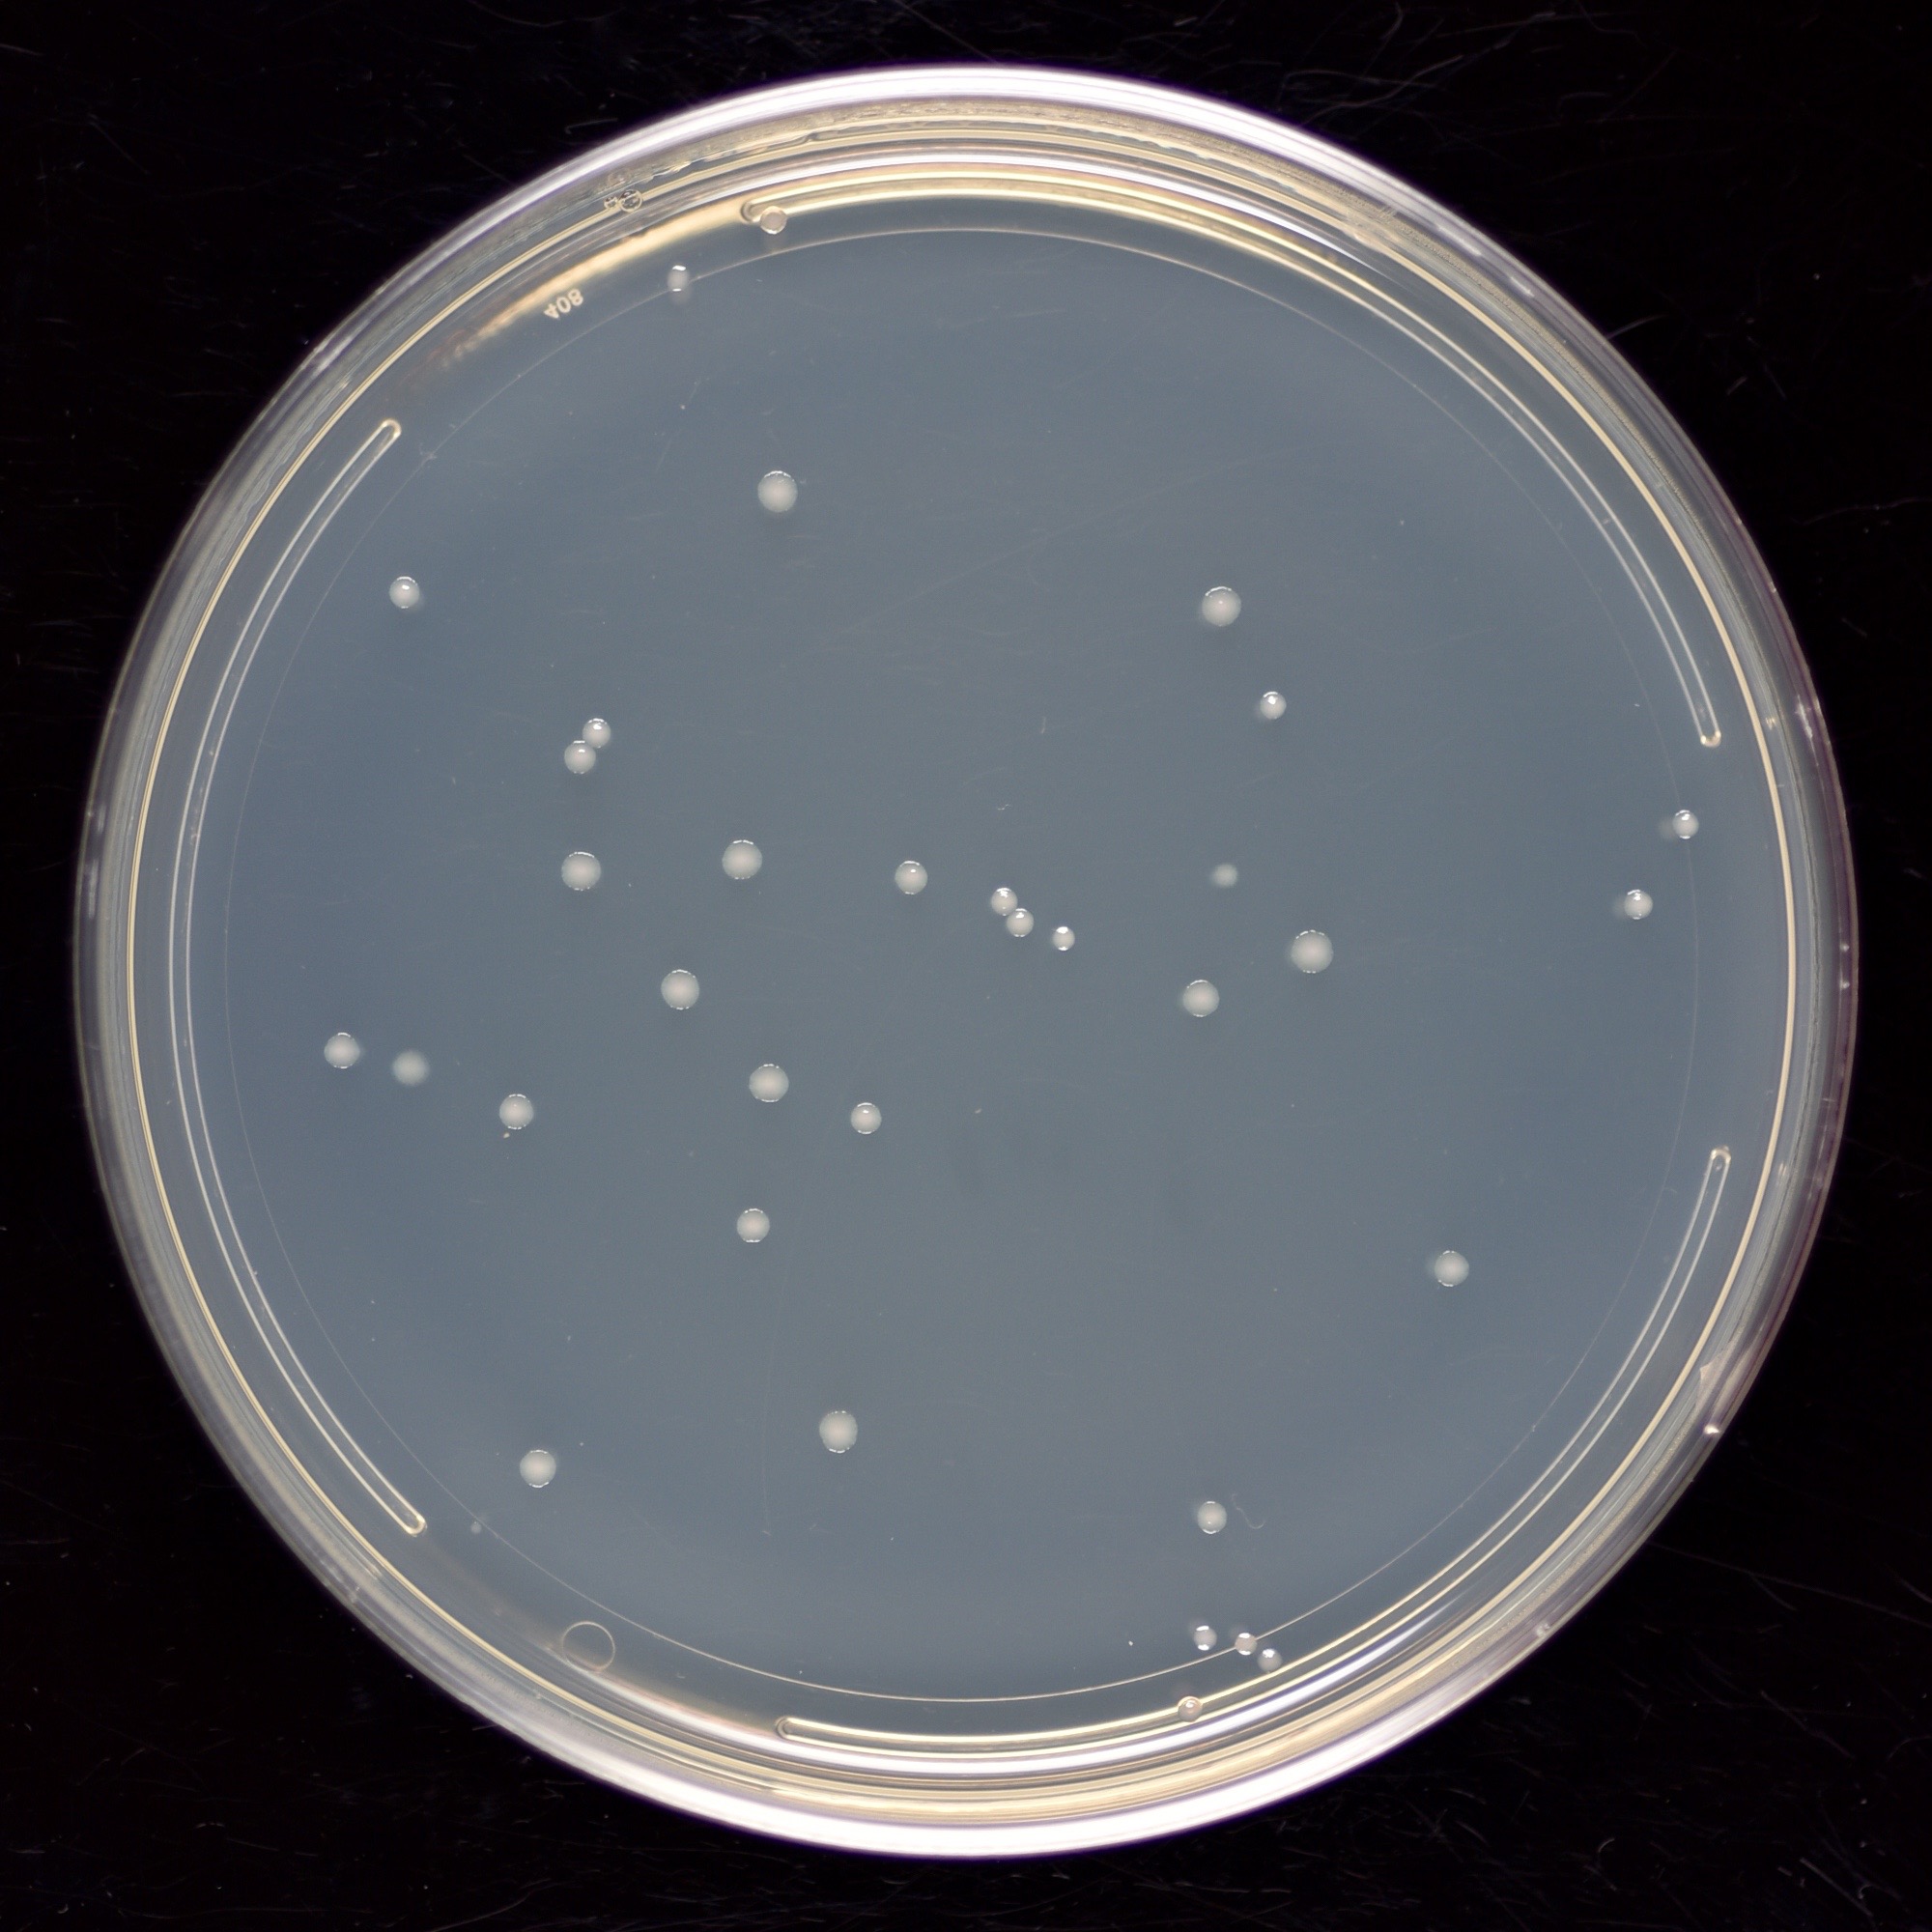 Colonies on a Plate - Science in the News2000 x 2000